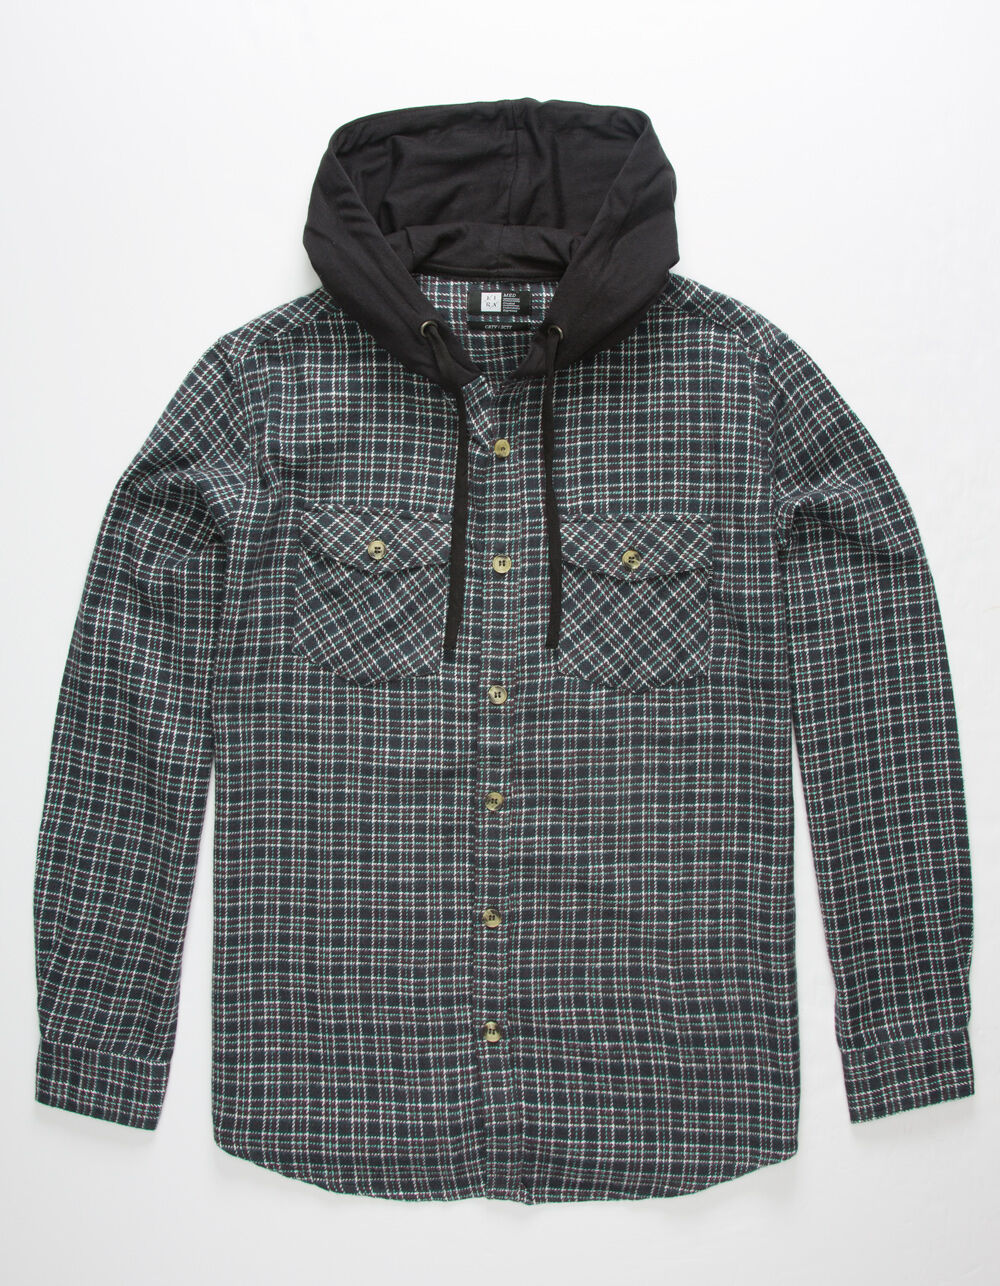 LIRA INYO Mens Hooded Flannel Shirt image number 0